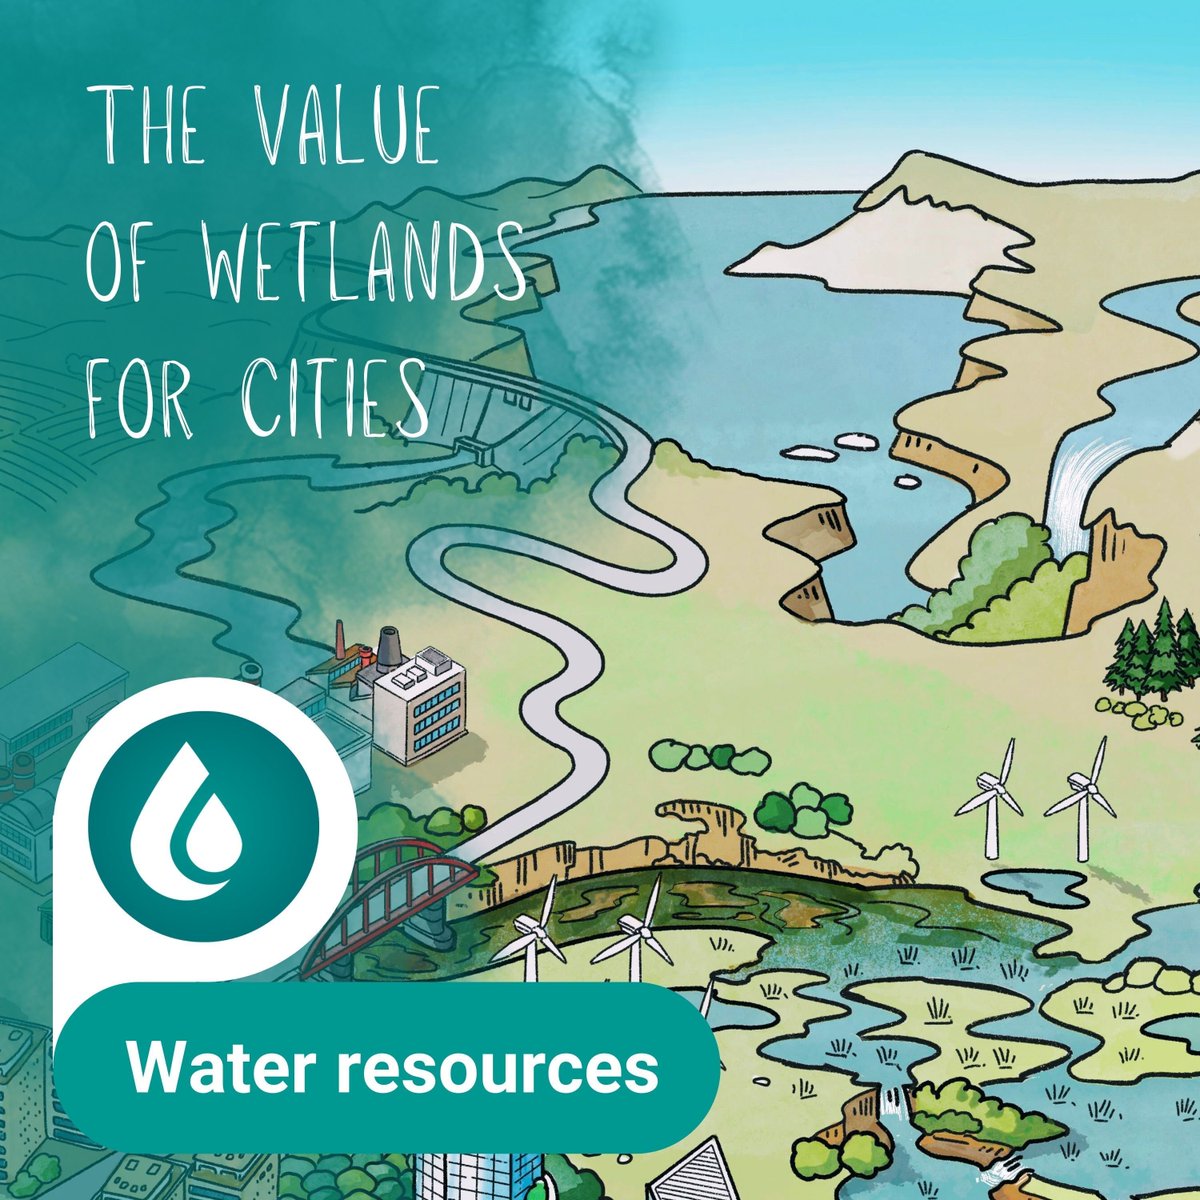 Discover the value of #WetlandsForCities 🐸 #CitiesWithNature

Water resources: Wetlands are nature's filters, regulating ecosystems by cleansing pollutants & enhancing water quality 🌏💧

©️ @RamsarConv @ICLEICBC @CitiesWNature @UN_Water

🔗buff.ly/3tRmkDD